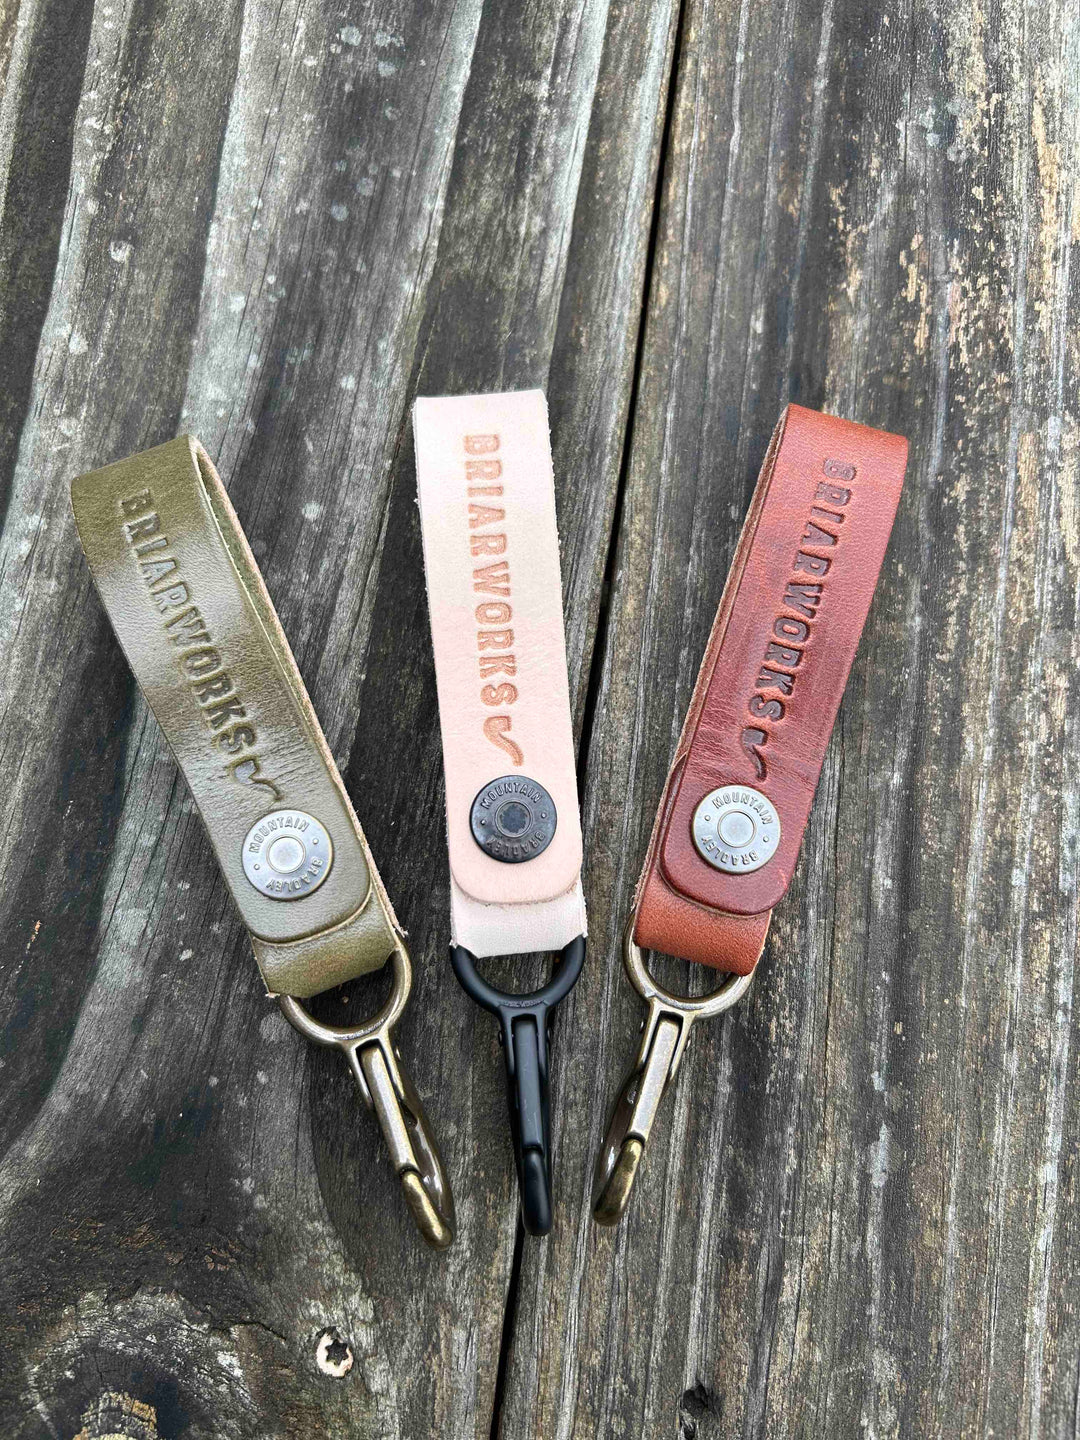 BriarWorks x Bradley Mountain Leather Key Fob and Pipe Rest - Olive